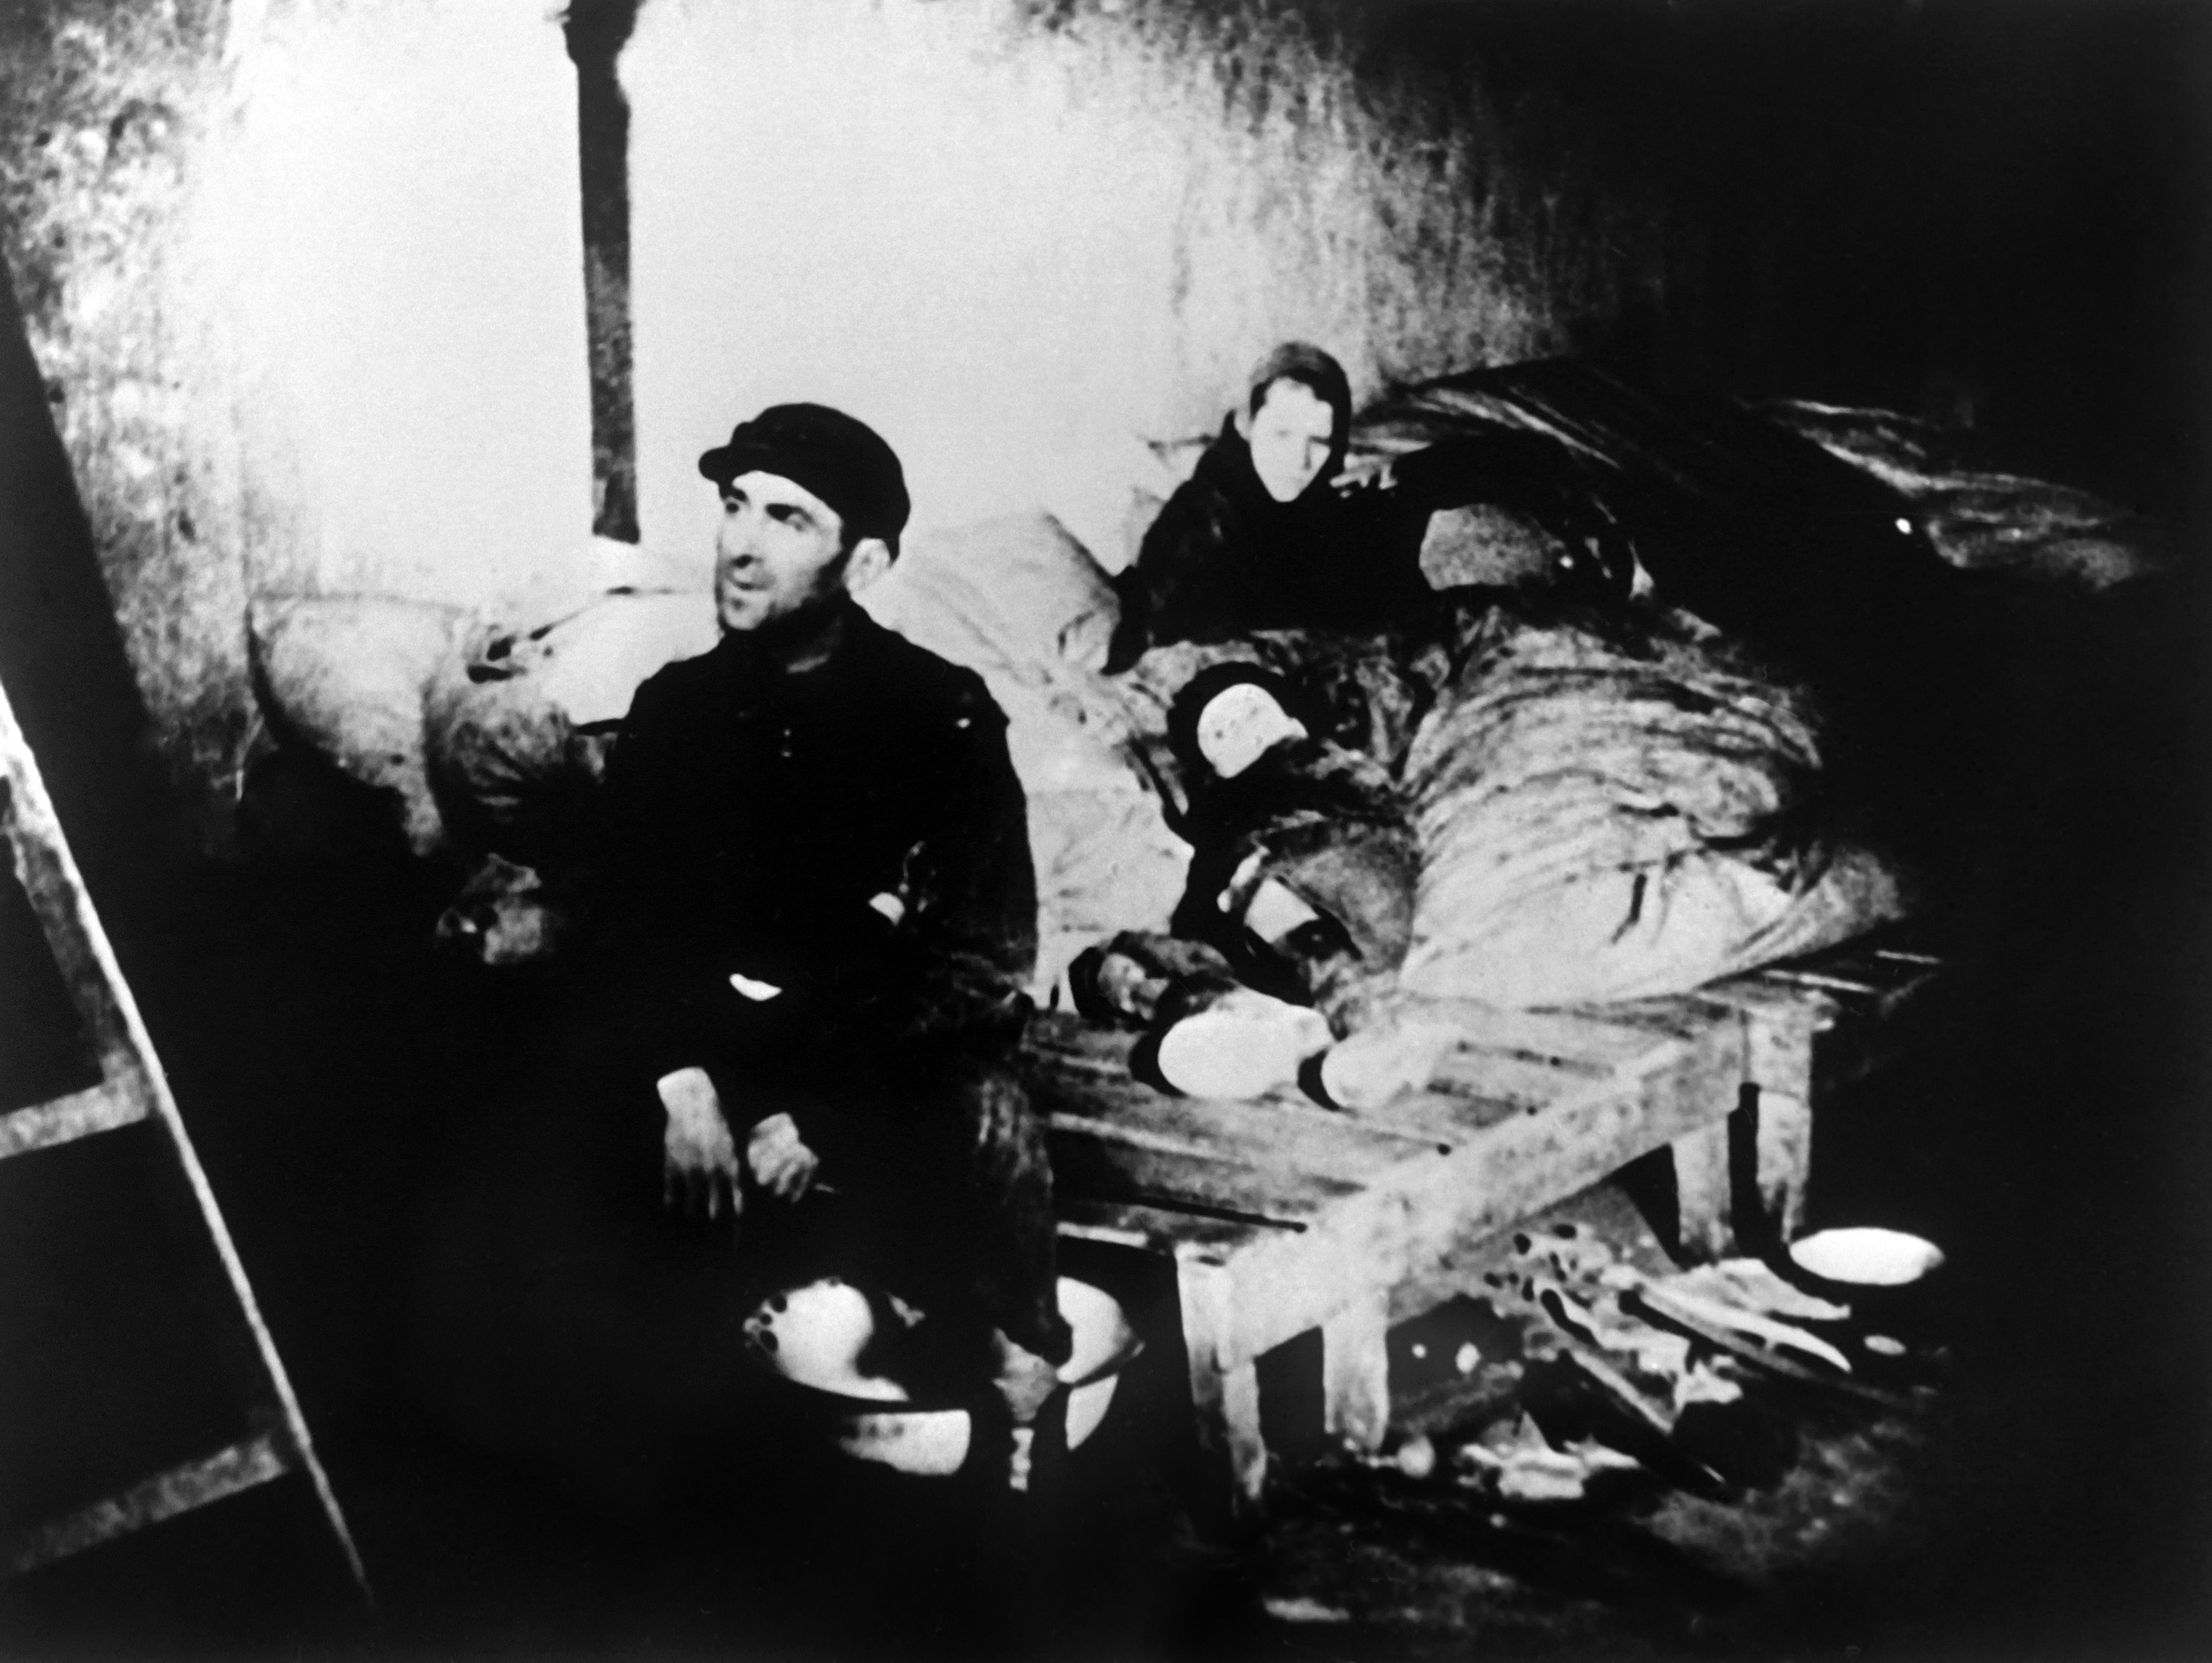 A CAF (Comite anti-fasciste) file picture dated 1943 shows a family in a house in the Warsaw Jewish ghetto during World War II. (Photo credit /AFP/Getty Images)